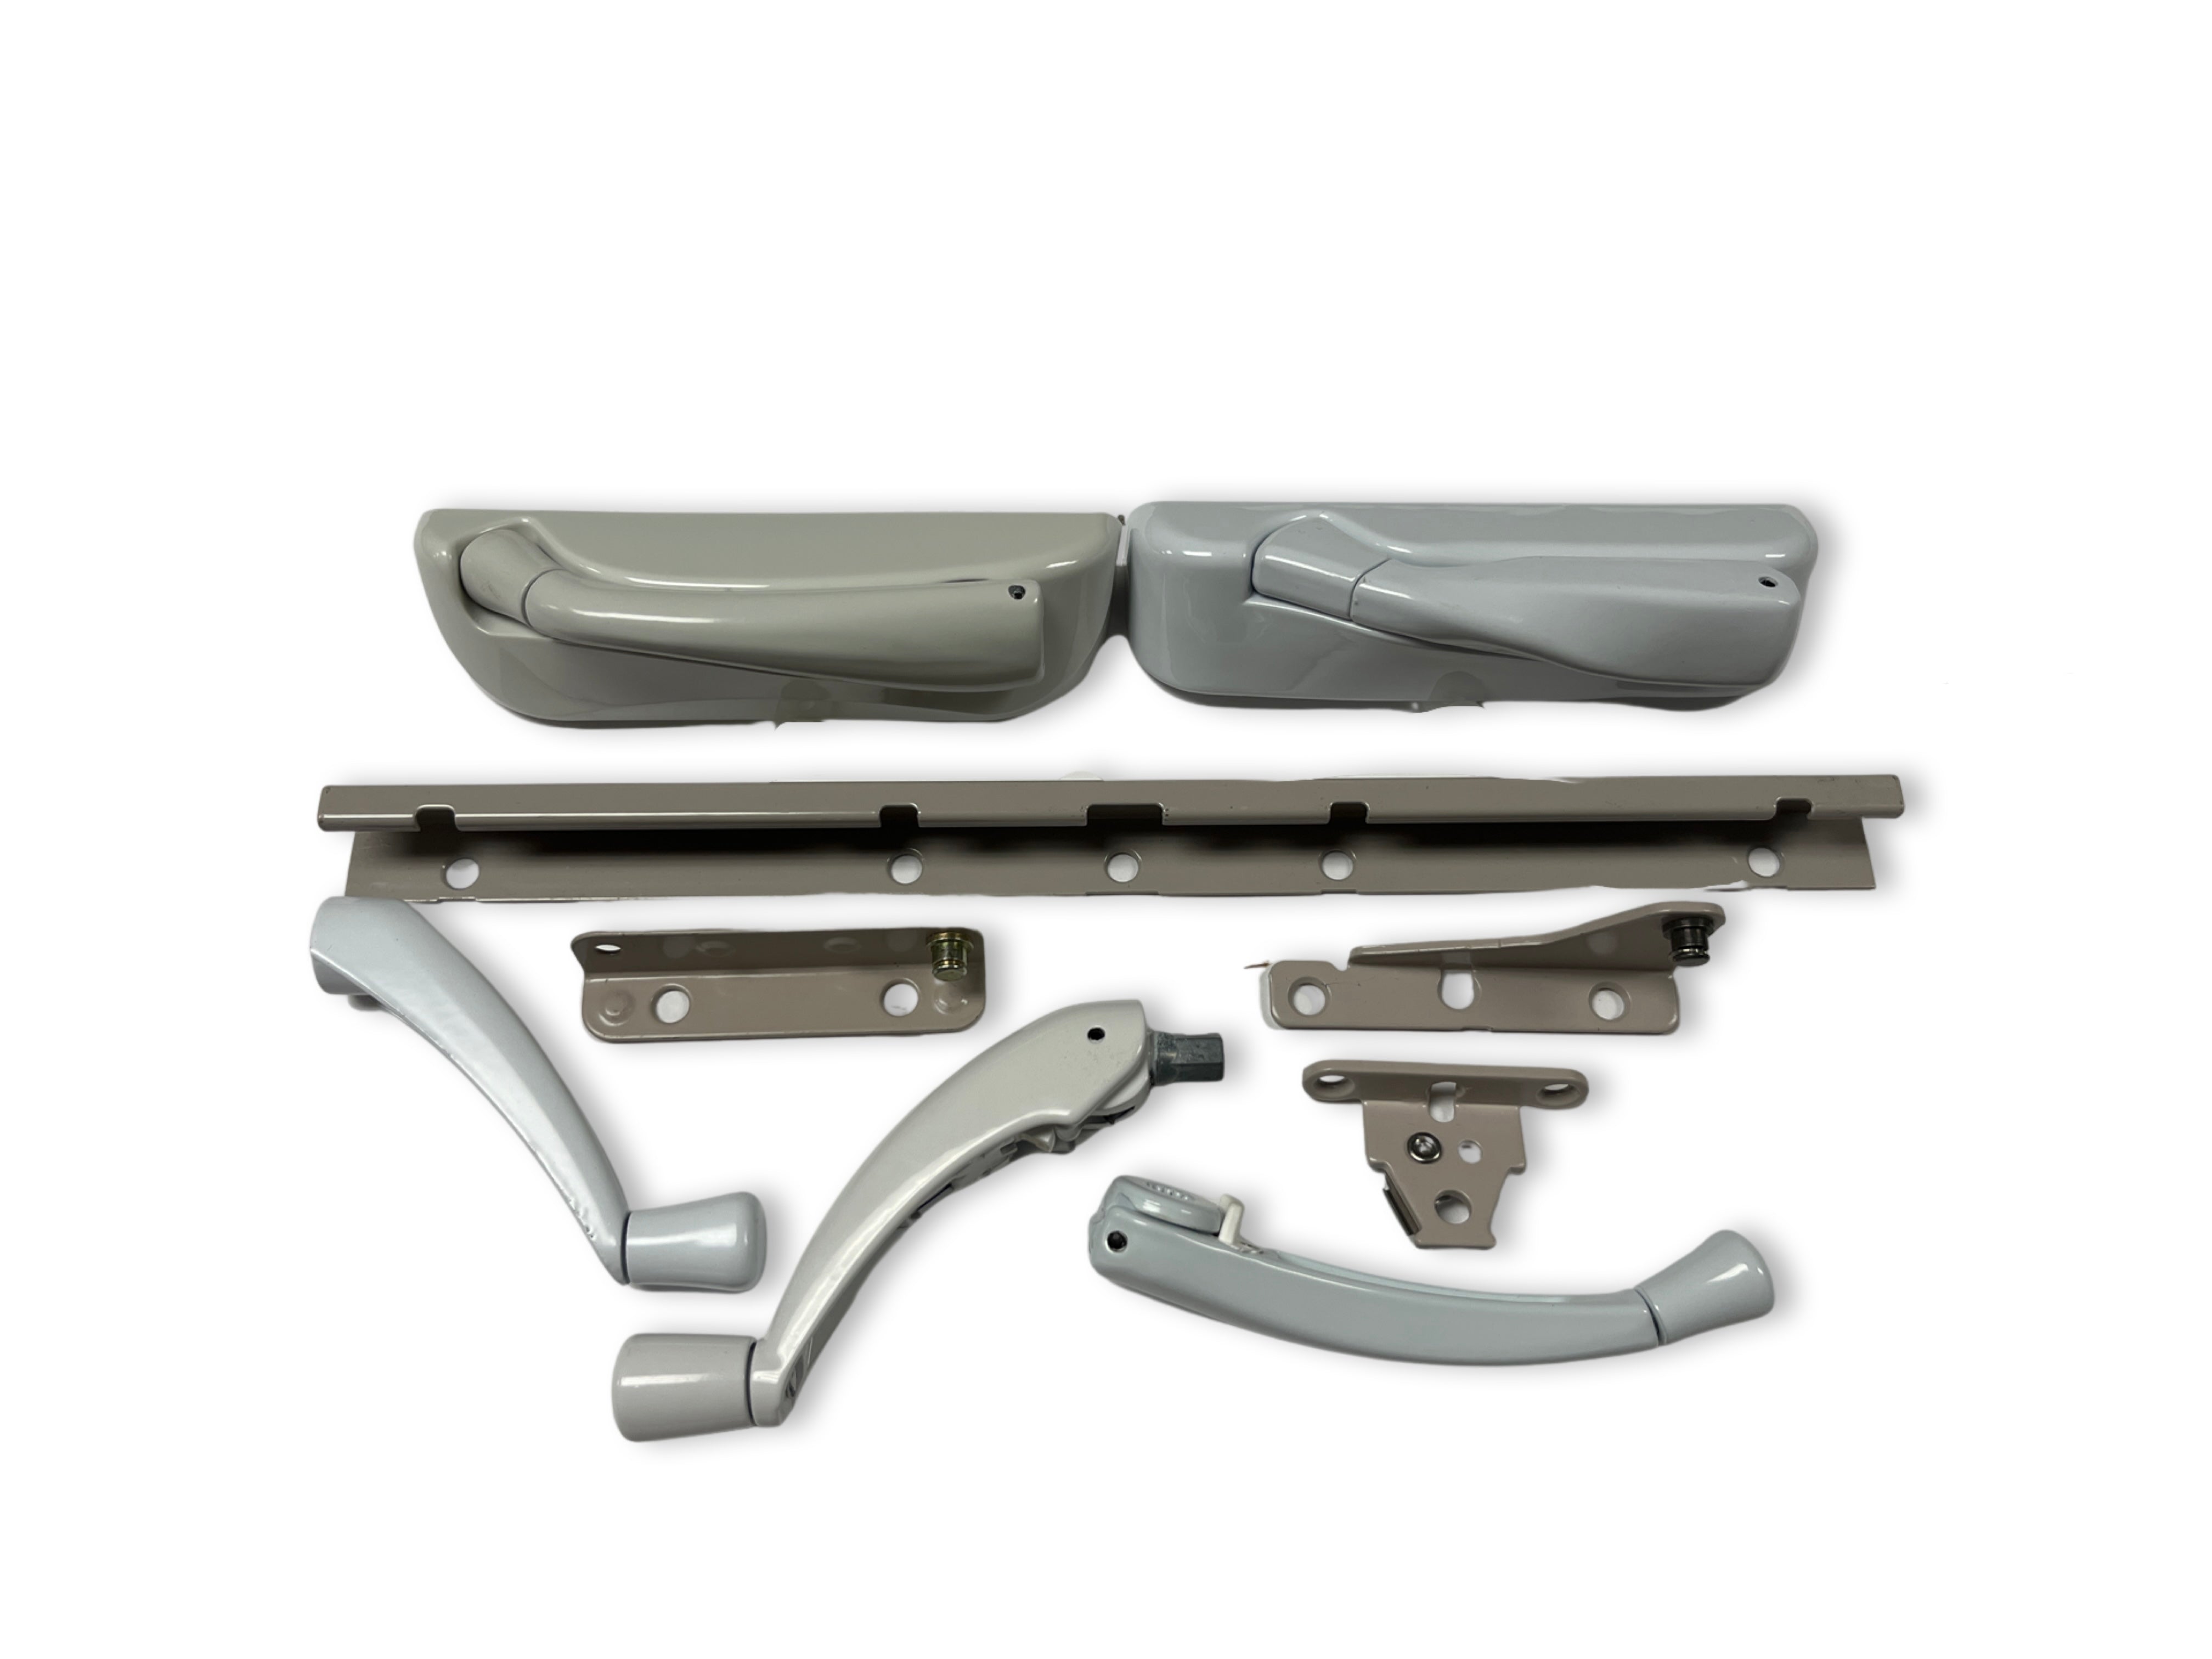 Operator Brackets, Handles, Covers & Accessories